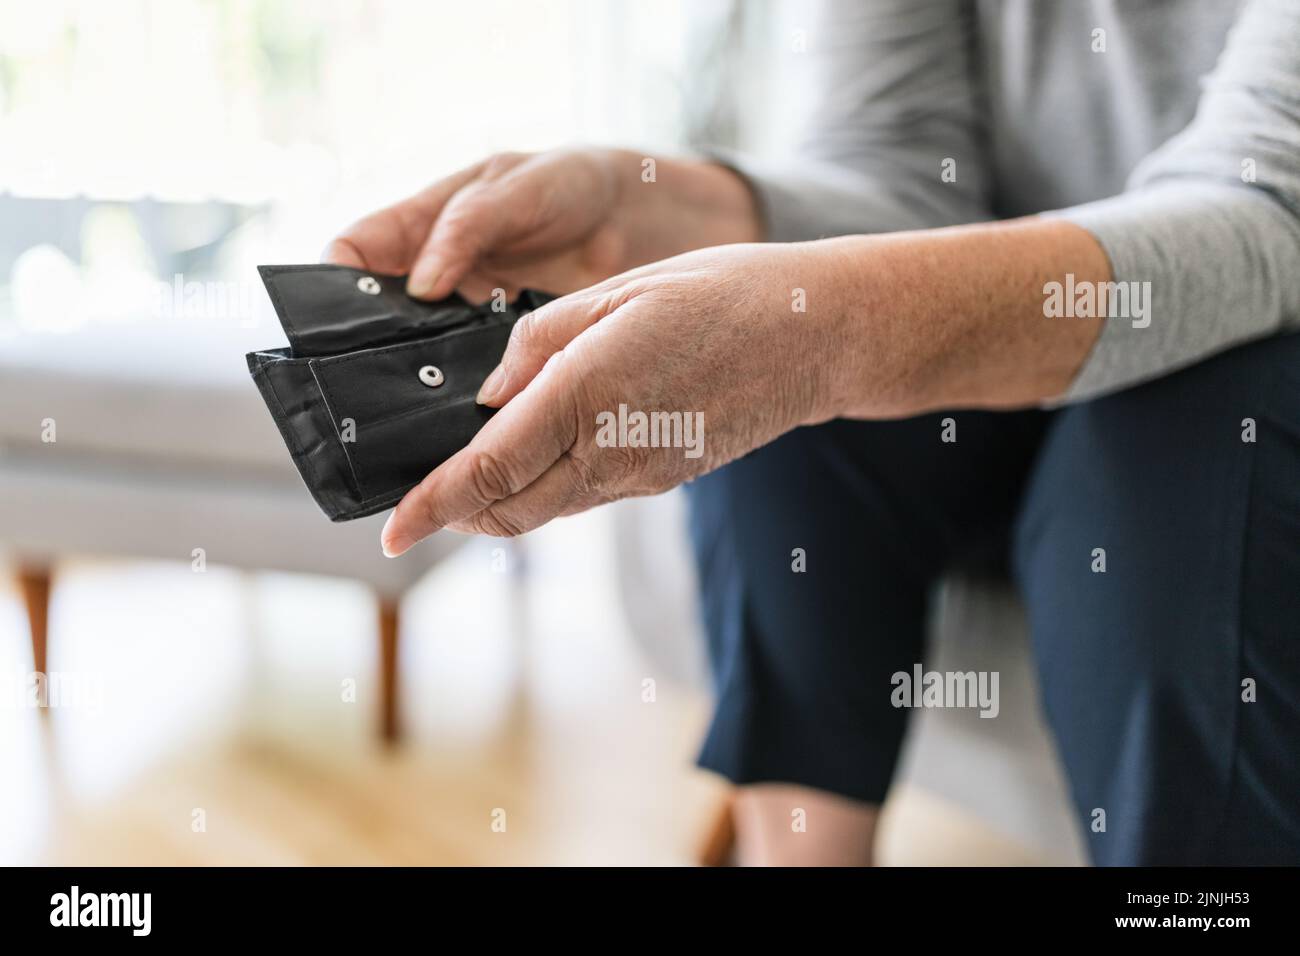 Desperate elderly woman unhappy with the rising cost of living Stock Photo